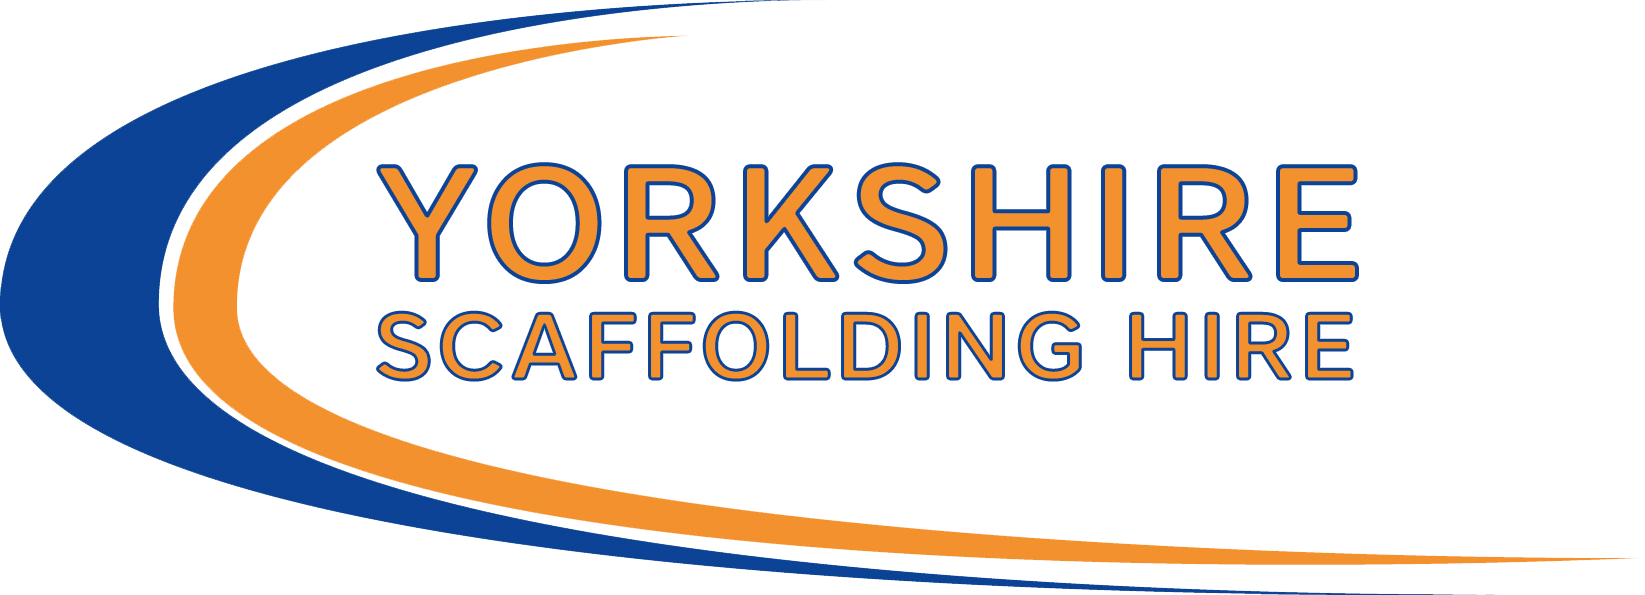 Yorkshire Scaffolding Hire